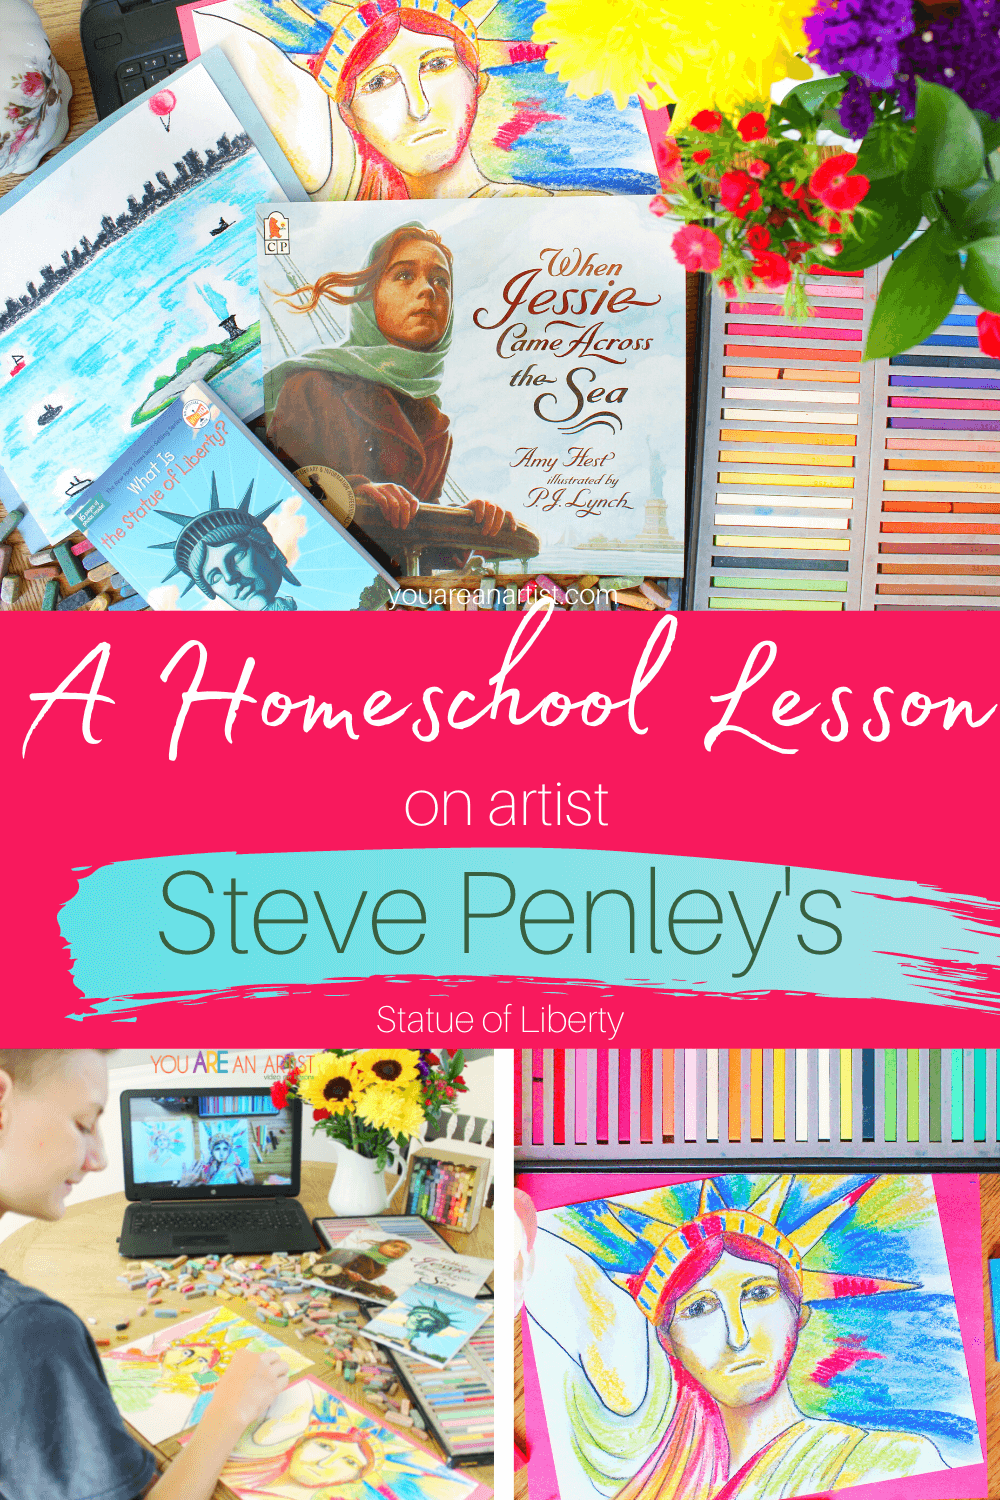 A Homeschool Lesson on Artist Steve Penley's Statue of Liberty : This homeschool lesson has everything you need to learn more about artist Steve Penley and the Statue of Liberty he painted, including a chance to create your own work of art! #onlineartlessons #chalkpastels #youareanartist #famousartists #statueofliberty #homeschoolart #artlessons #stevepenley